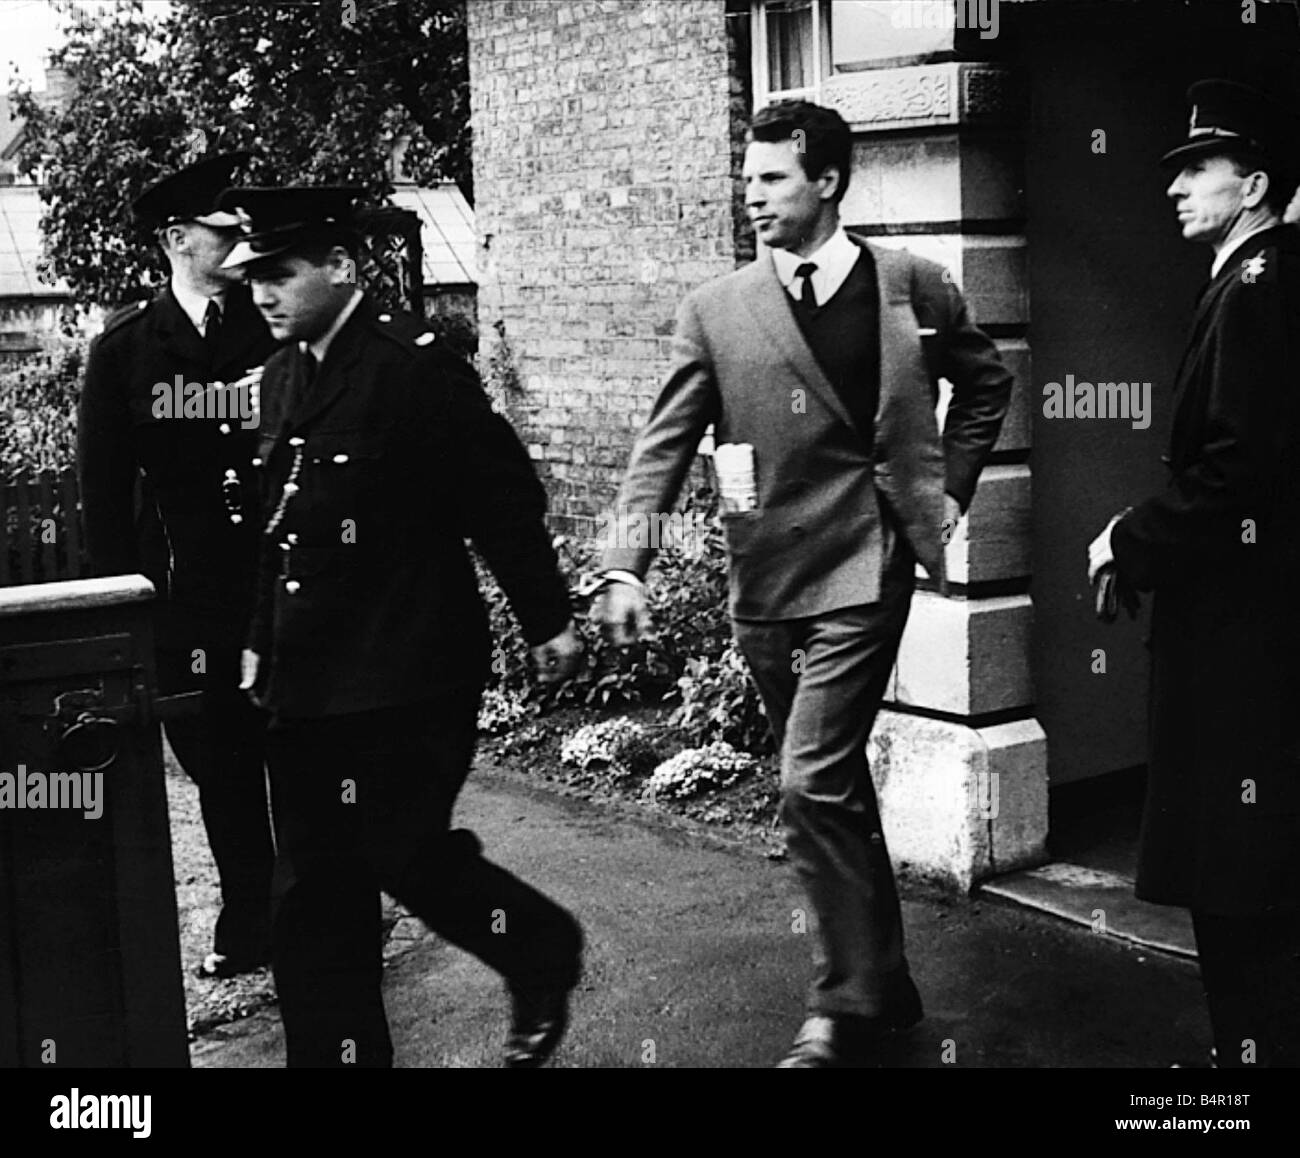 Charles Wilson Great Train Robber led away from court Sep1963 handcuffed to prison officer January 20th 1964 The trial of the alledged Great Train Robbers begins at Aylesbury Crown Court Stock Photo